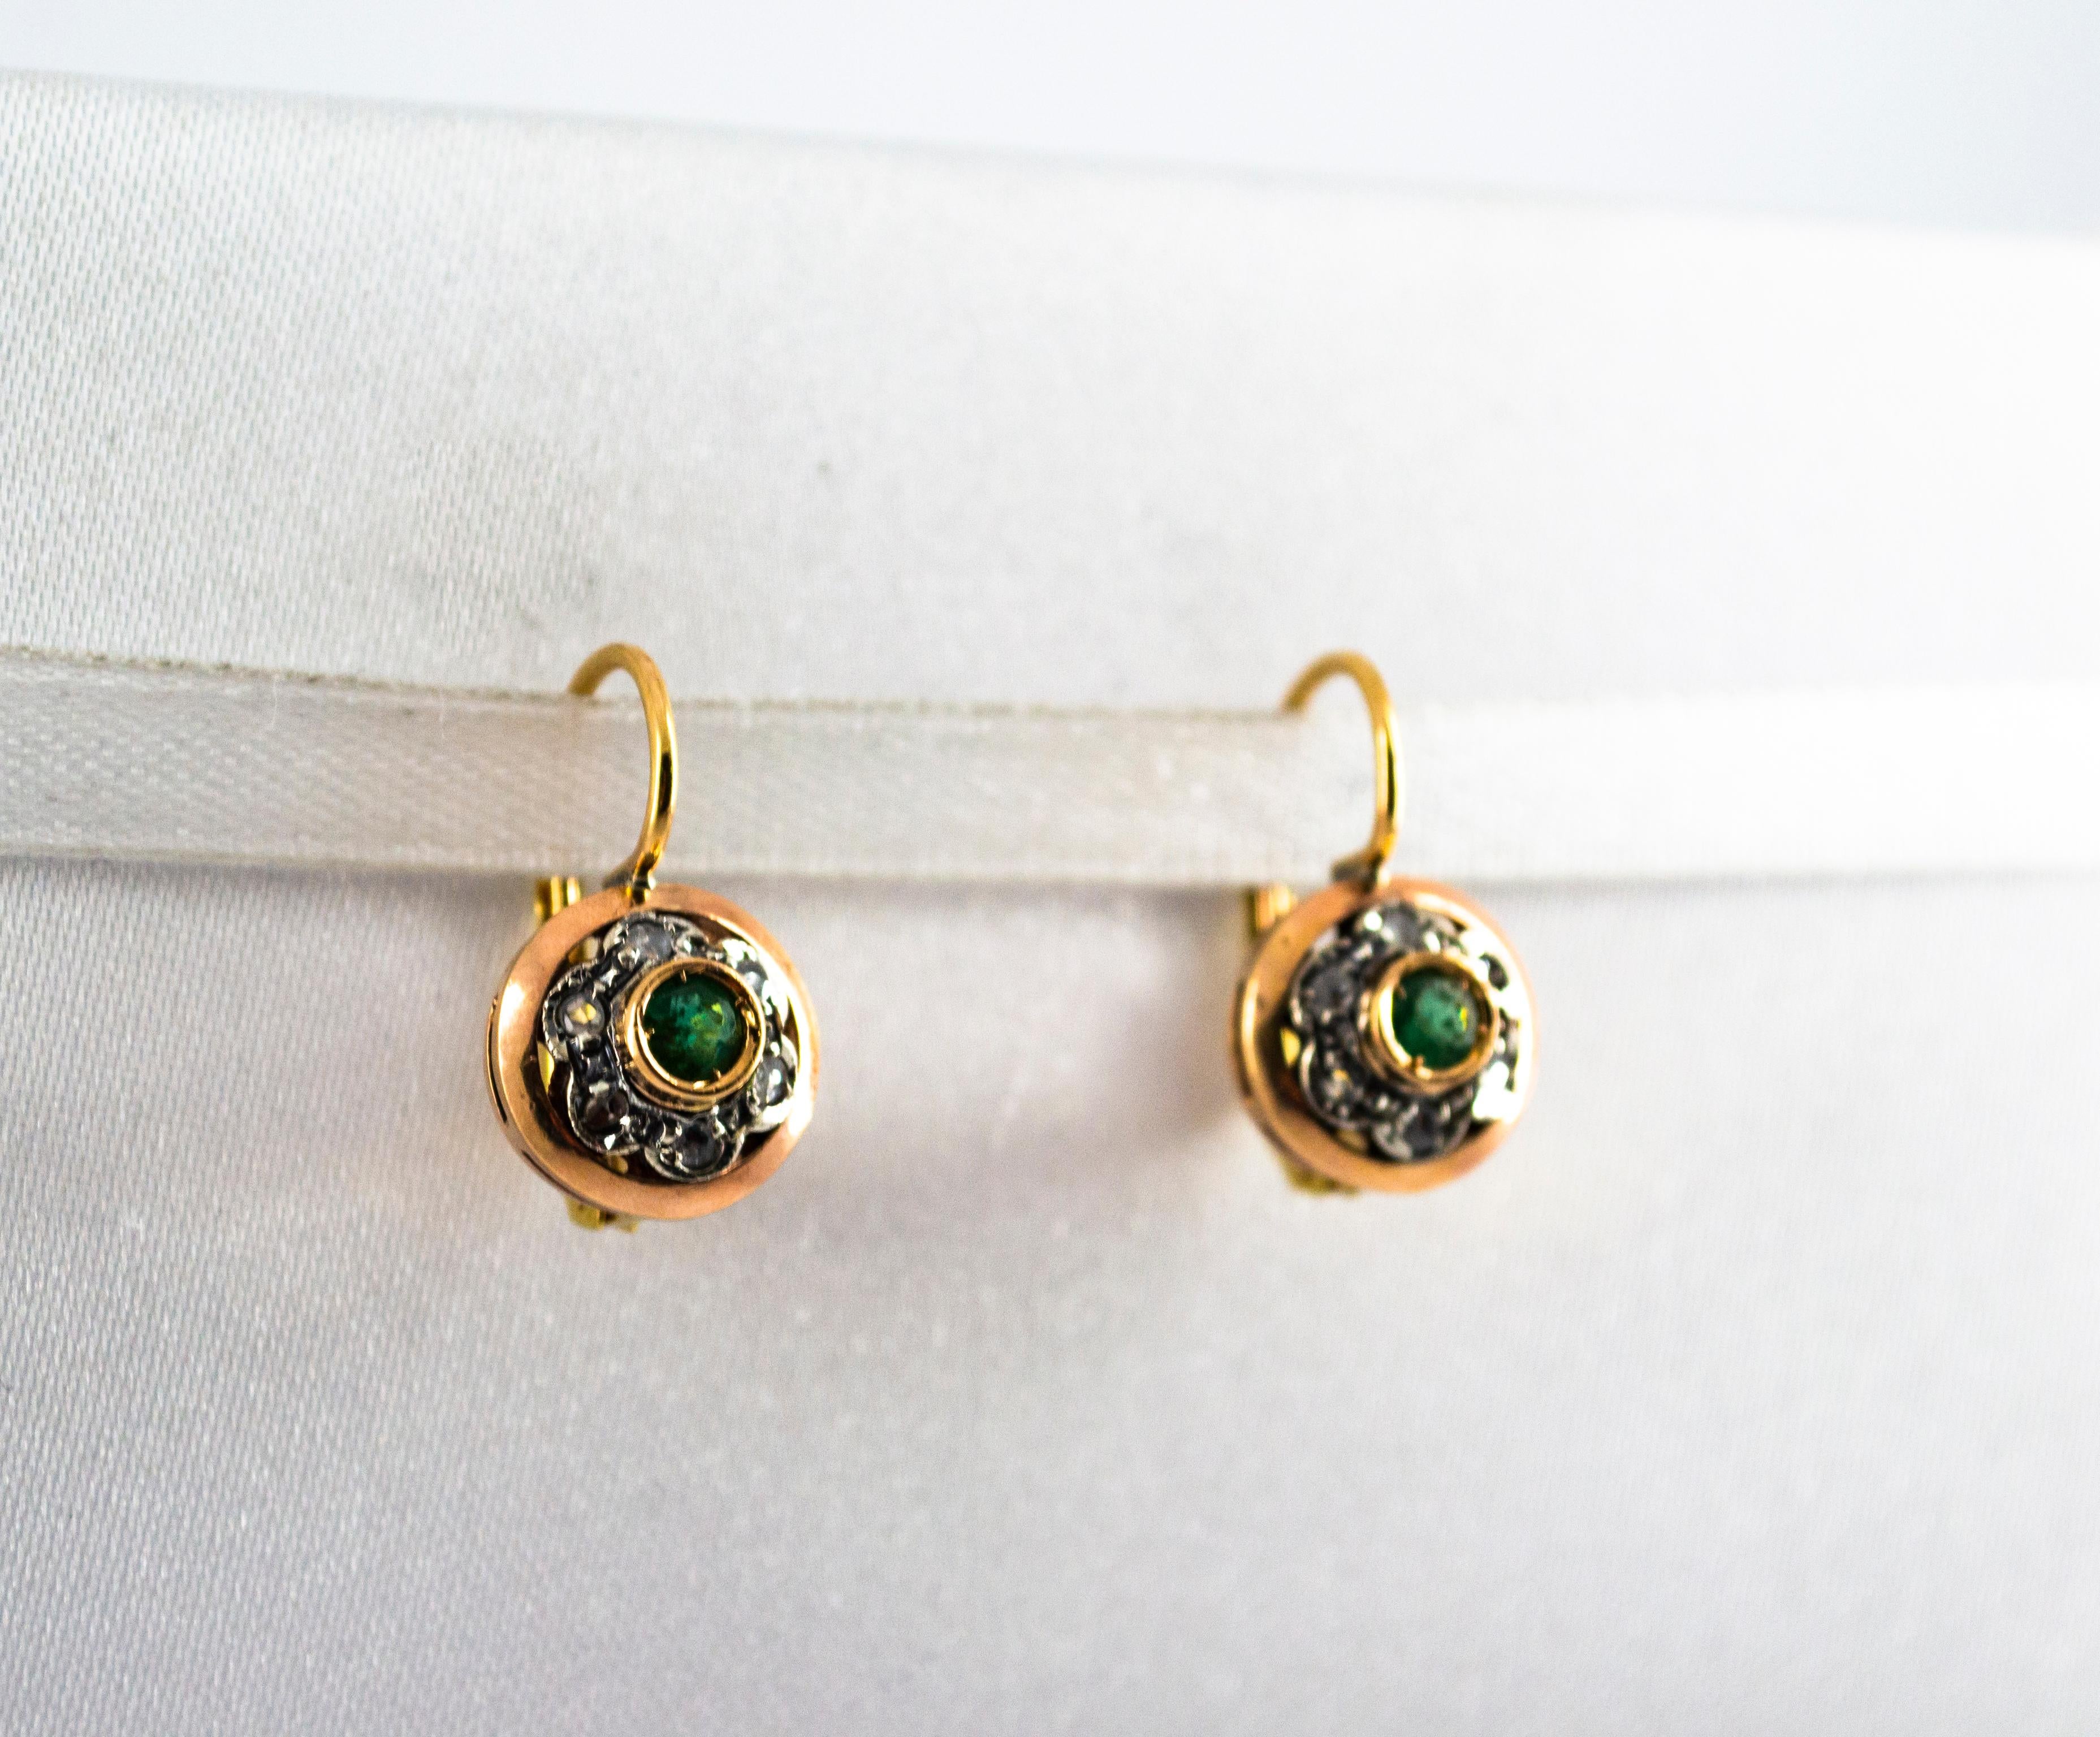 These Lever-Back Earrings are made of 9K Yellow Gold and Sterling Silver.
These Earrings have 0.06 Carats of White Rose Cut Diamonds.
These Earrings have also 0.15 Carat of Emeralds.
These Earrings are available also with Rubies or Blue